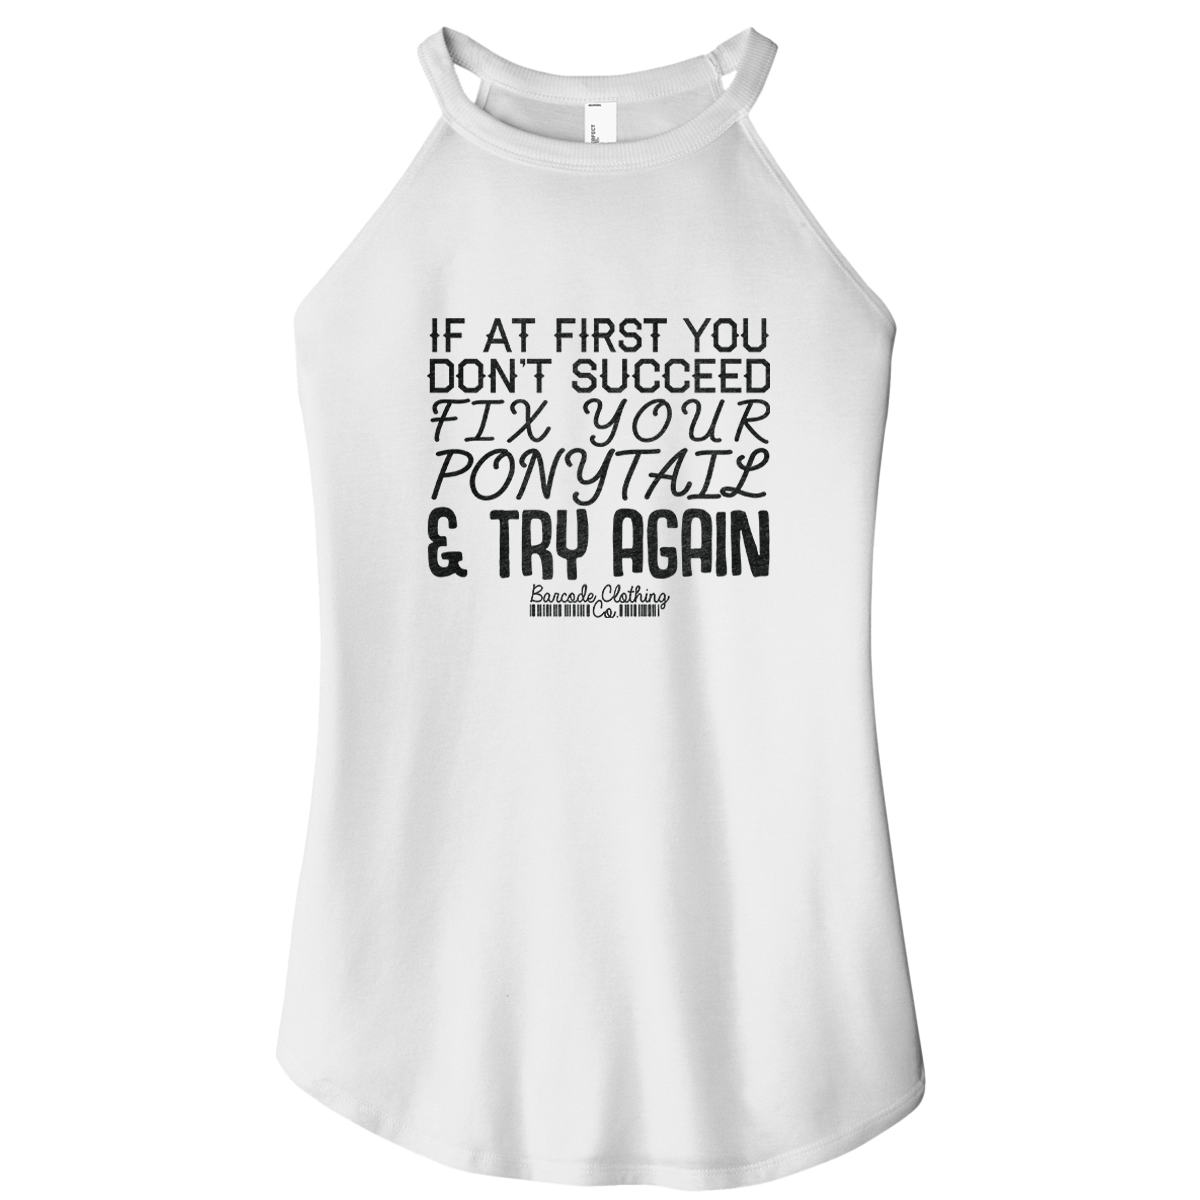 If At First You Don't Succeed Rocker Tank